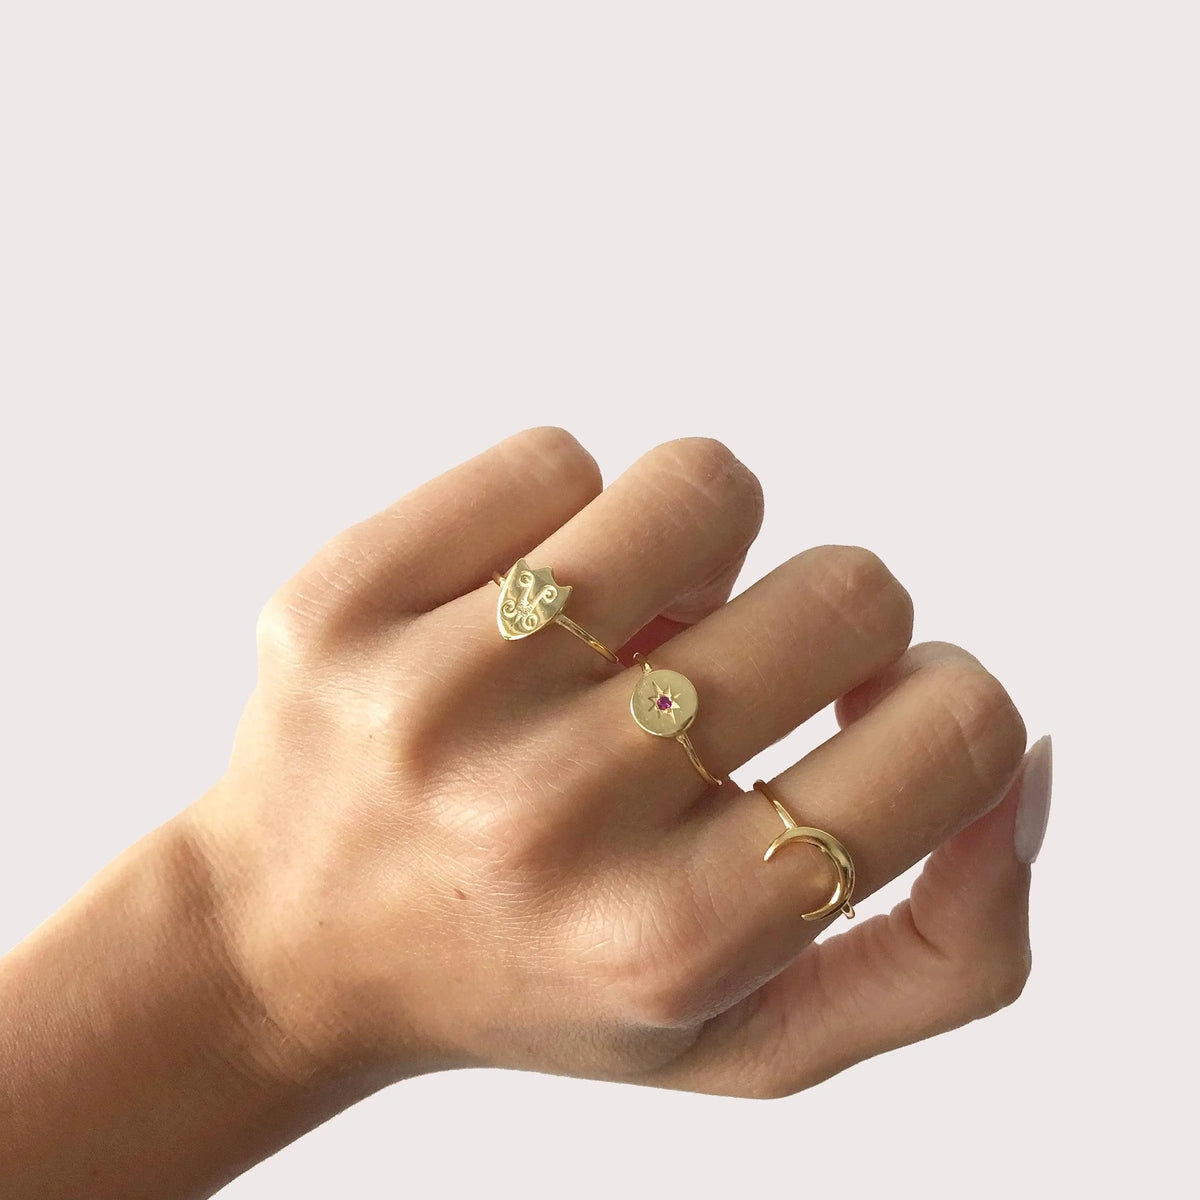 Delicate Dainty Harmony Ring in Gold Vermeil